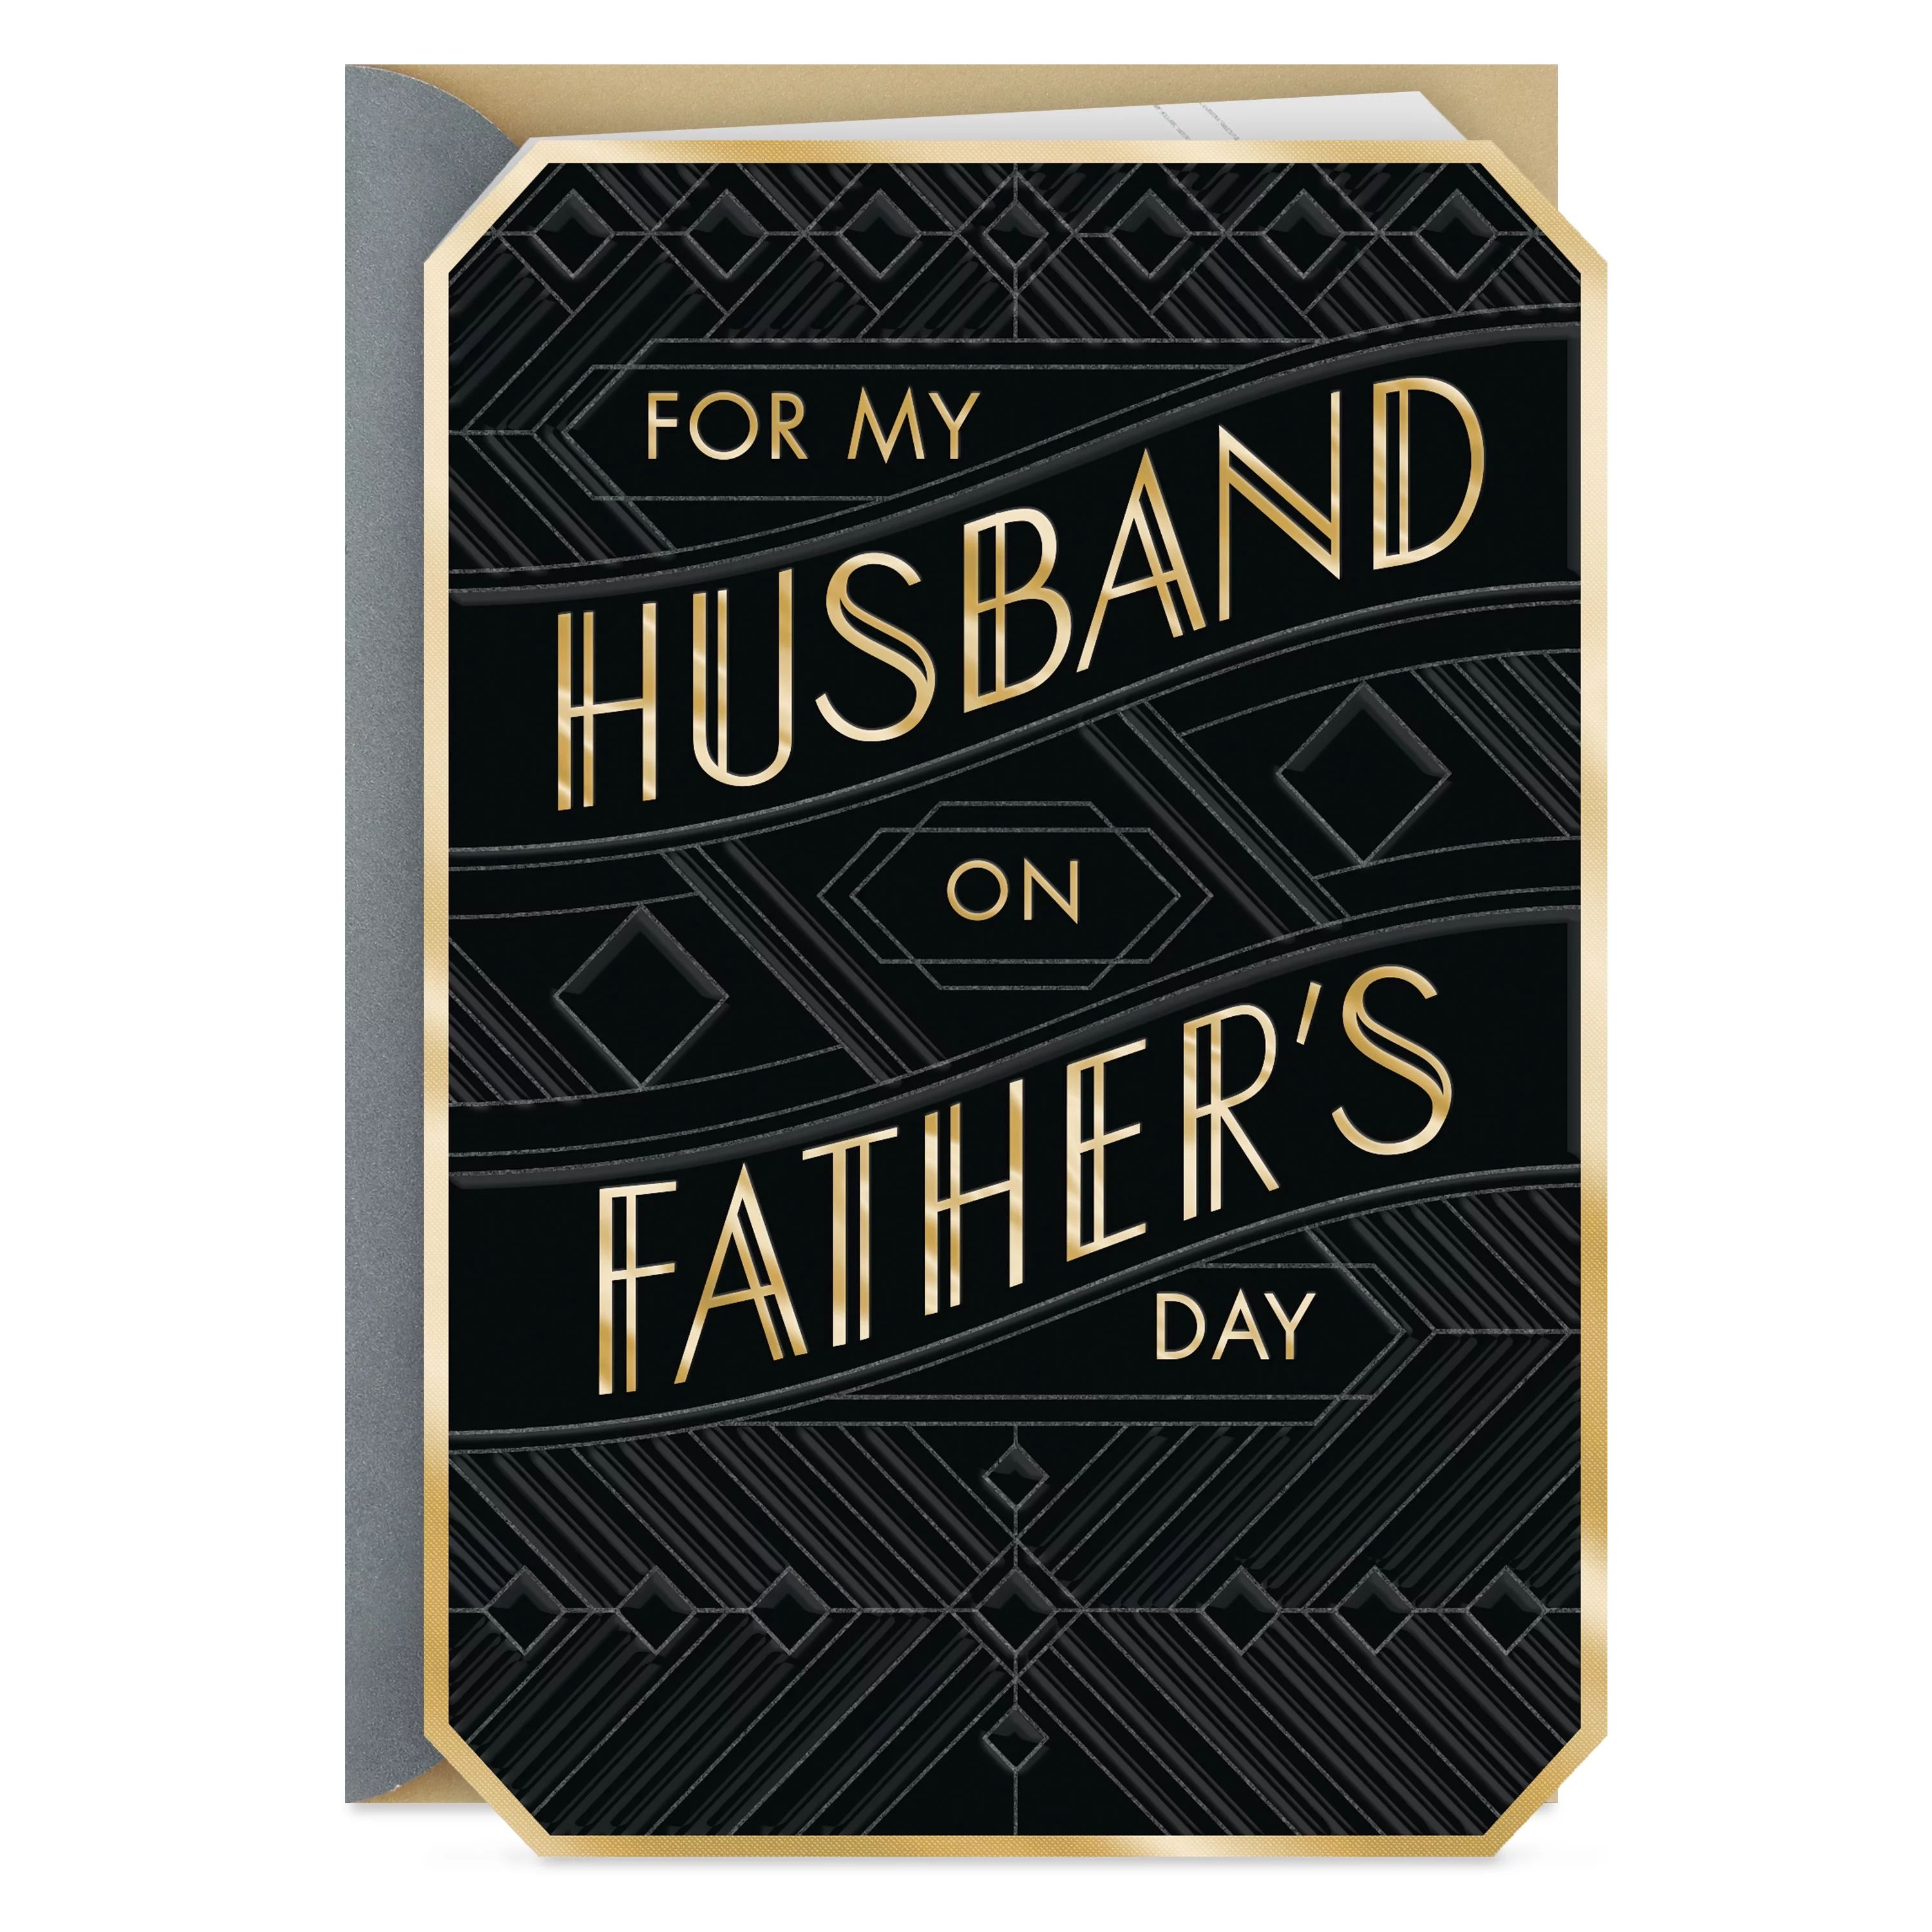 Hallmark Father's Day Greeting Card with Envelope, 5" x 7.19" | Walmart (US)